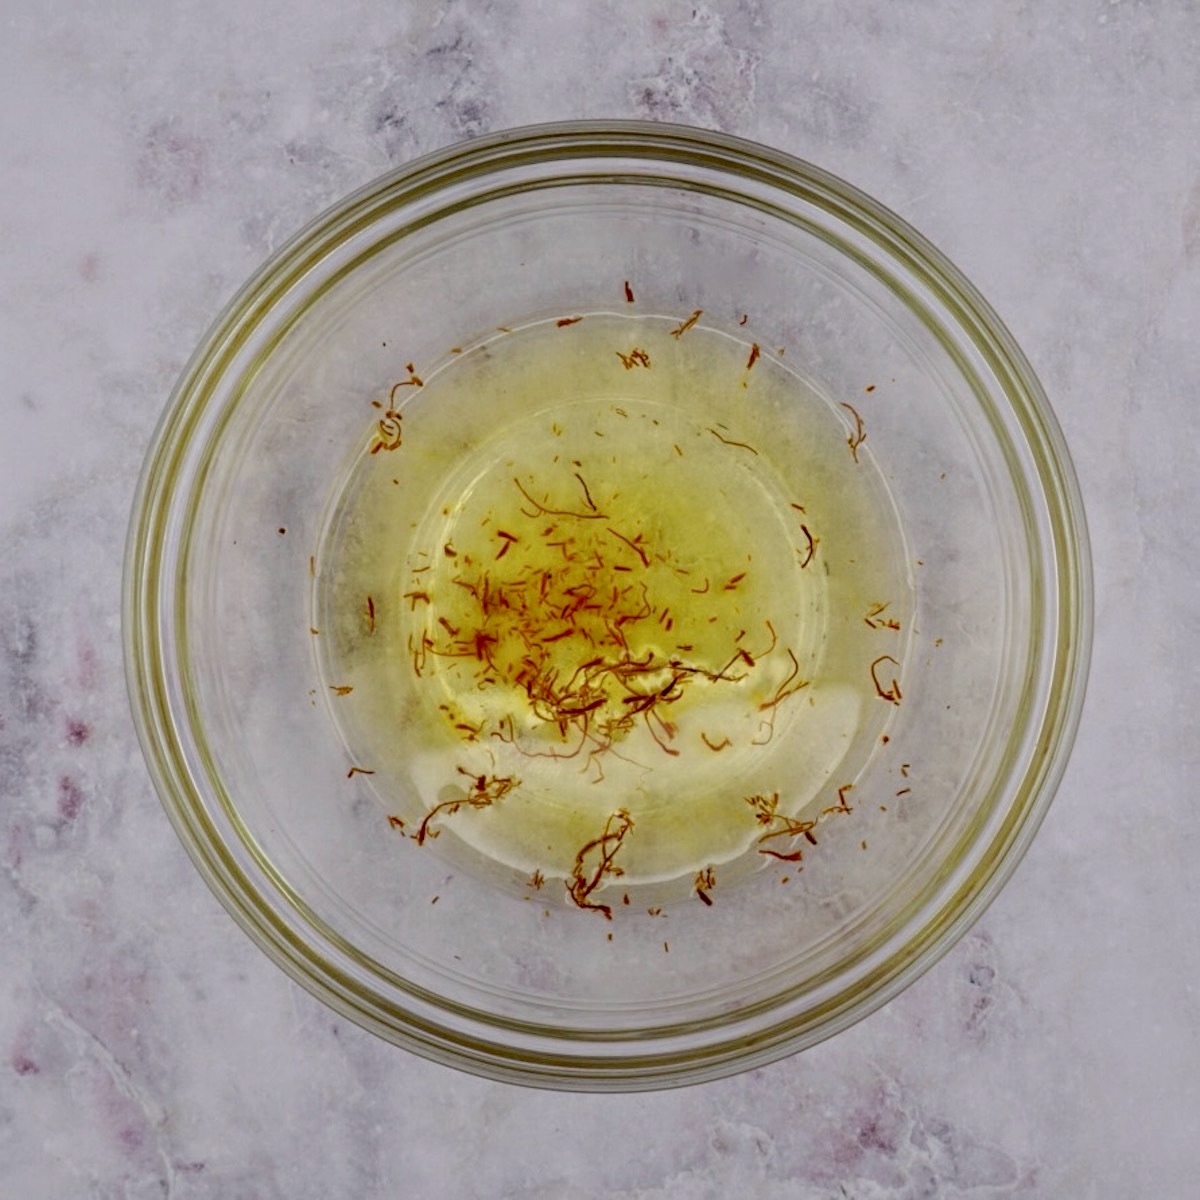 A bowl of saffron threads in water